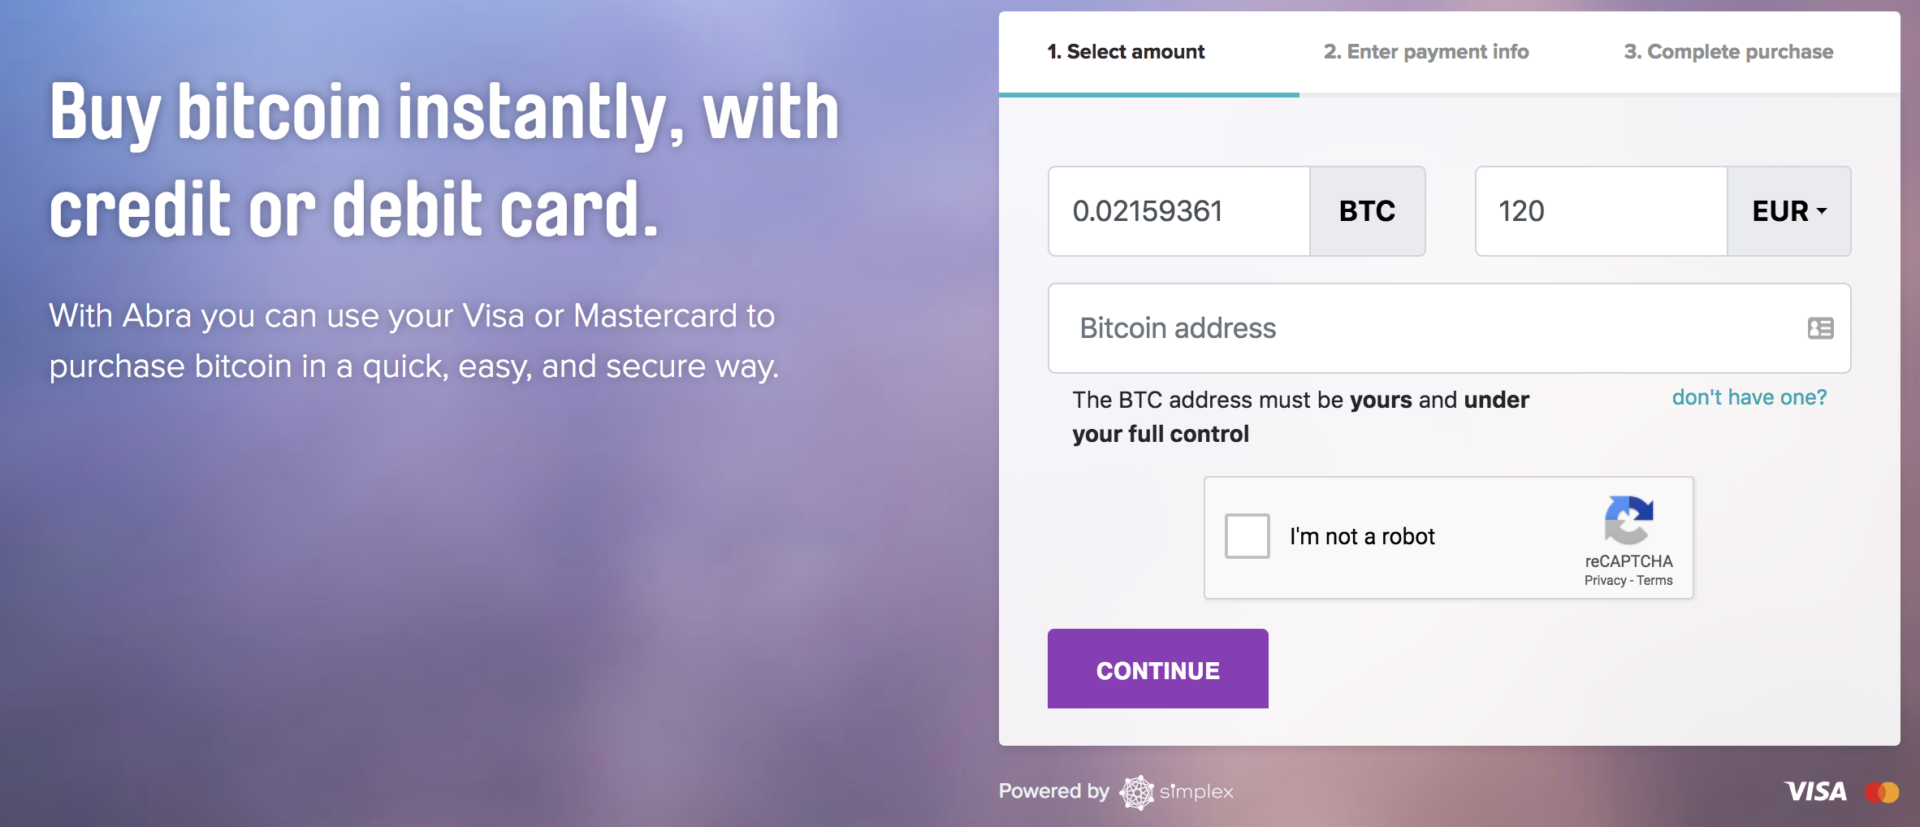 Bitcoin Purchase with Credit/Debit Cards on Abra 16